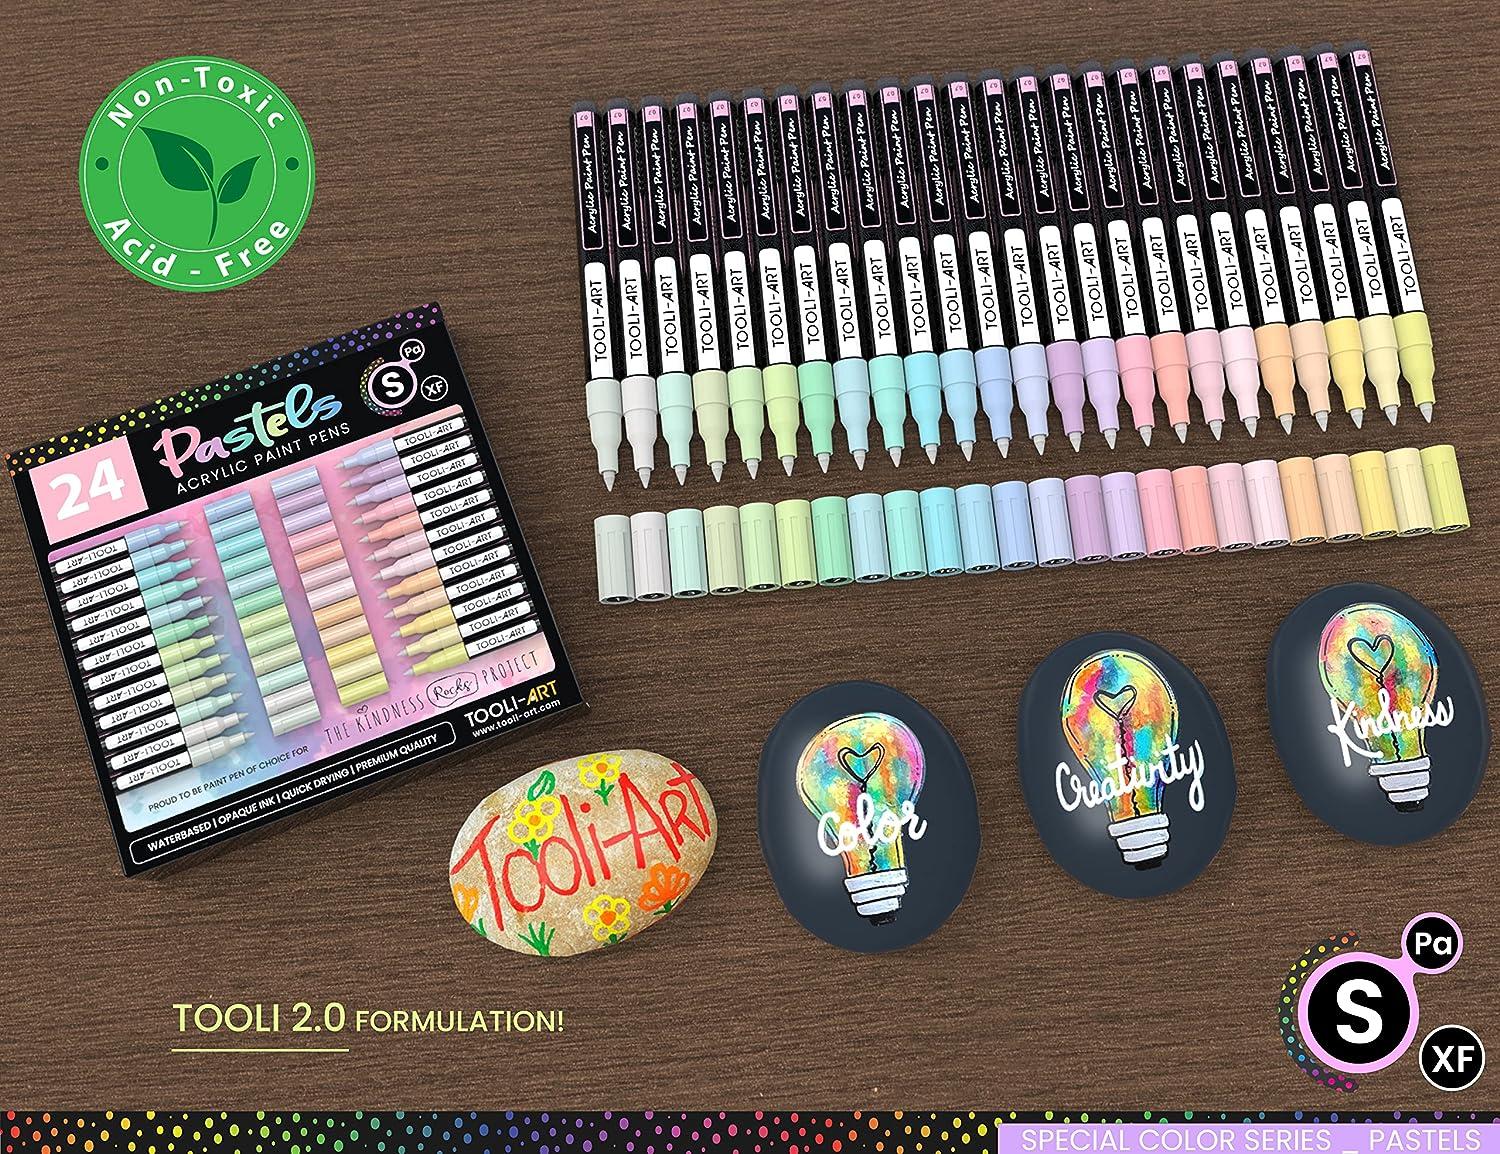 TOOLI-ART - This Tooli-Art Jewel set has a deeper and darker range of  colors. This also comes in extra fine and medium tips!